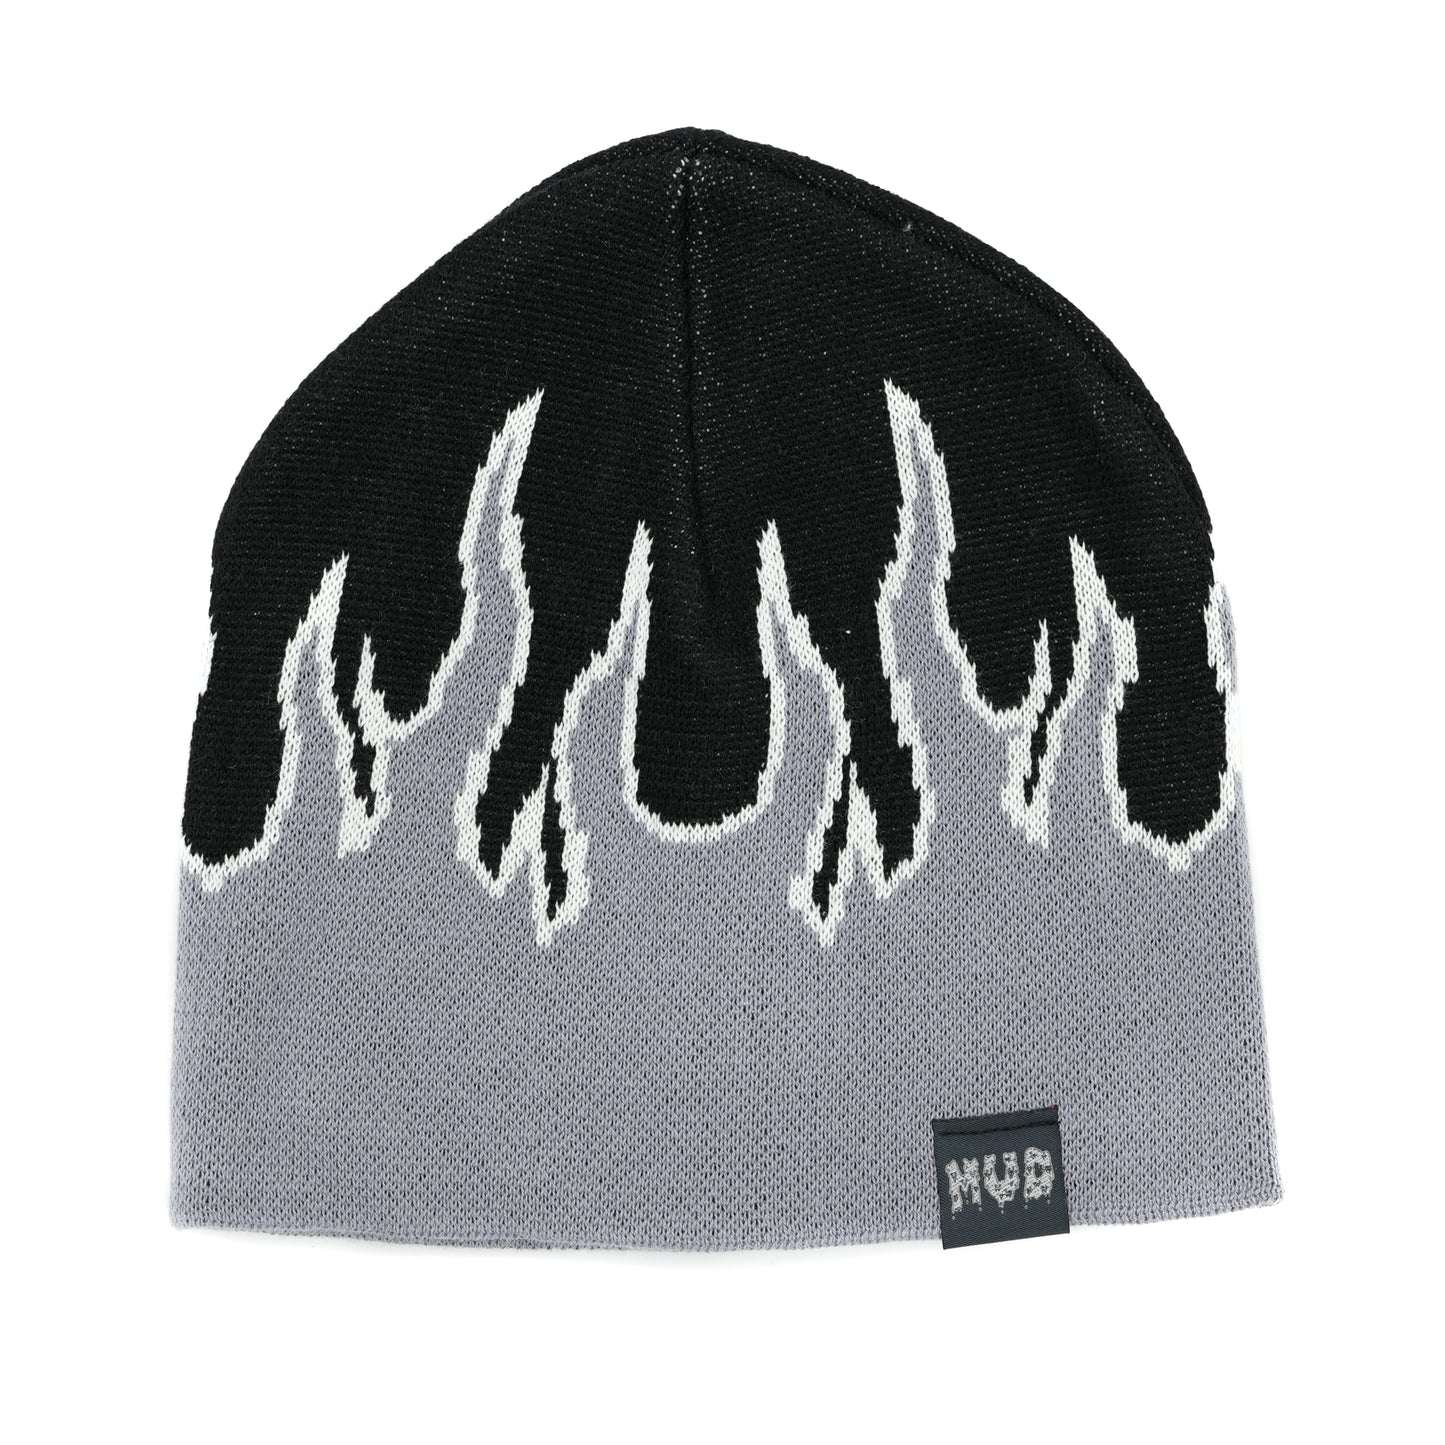 Mud Flame Beanie- Assorted Colors